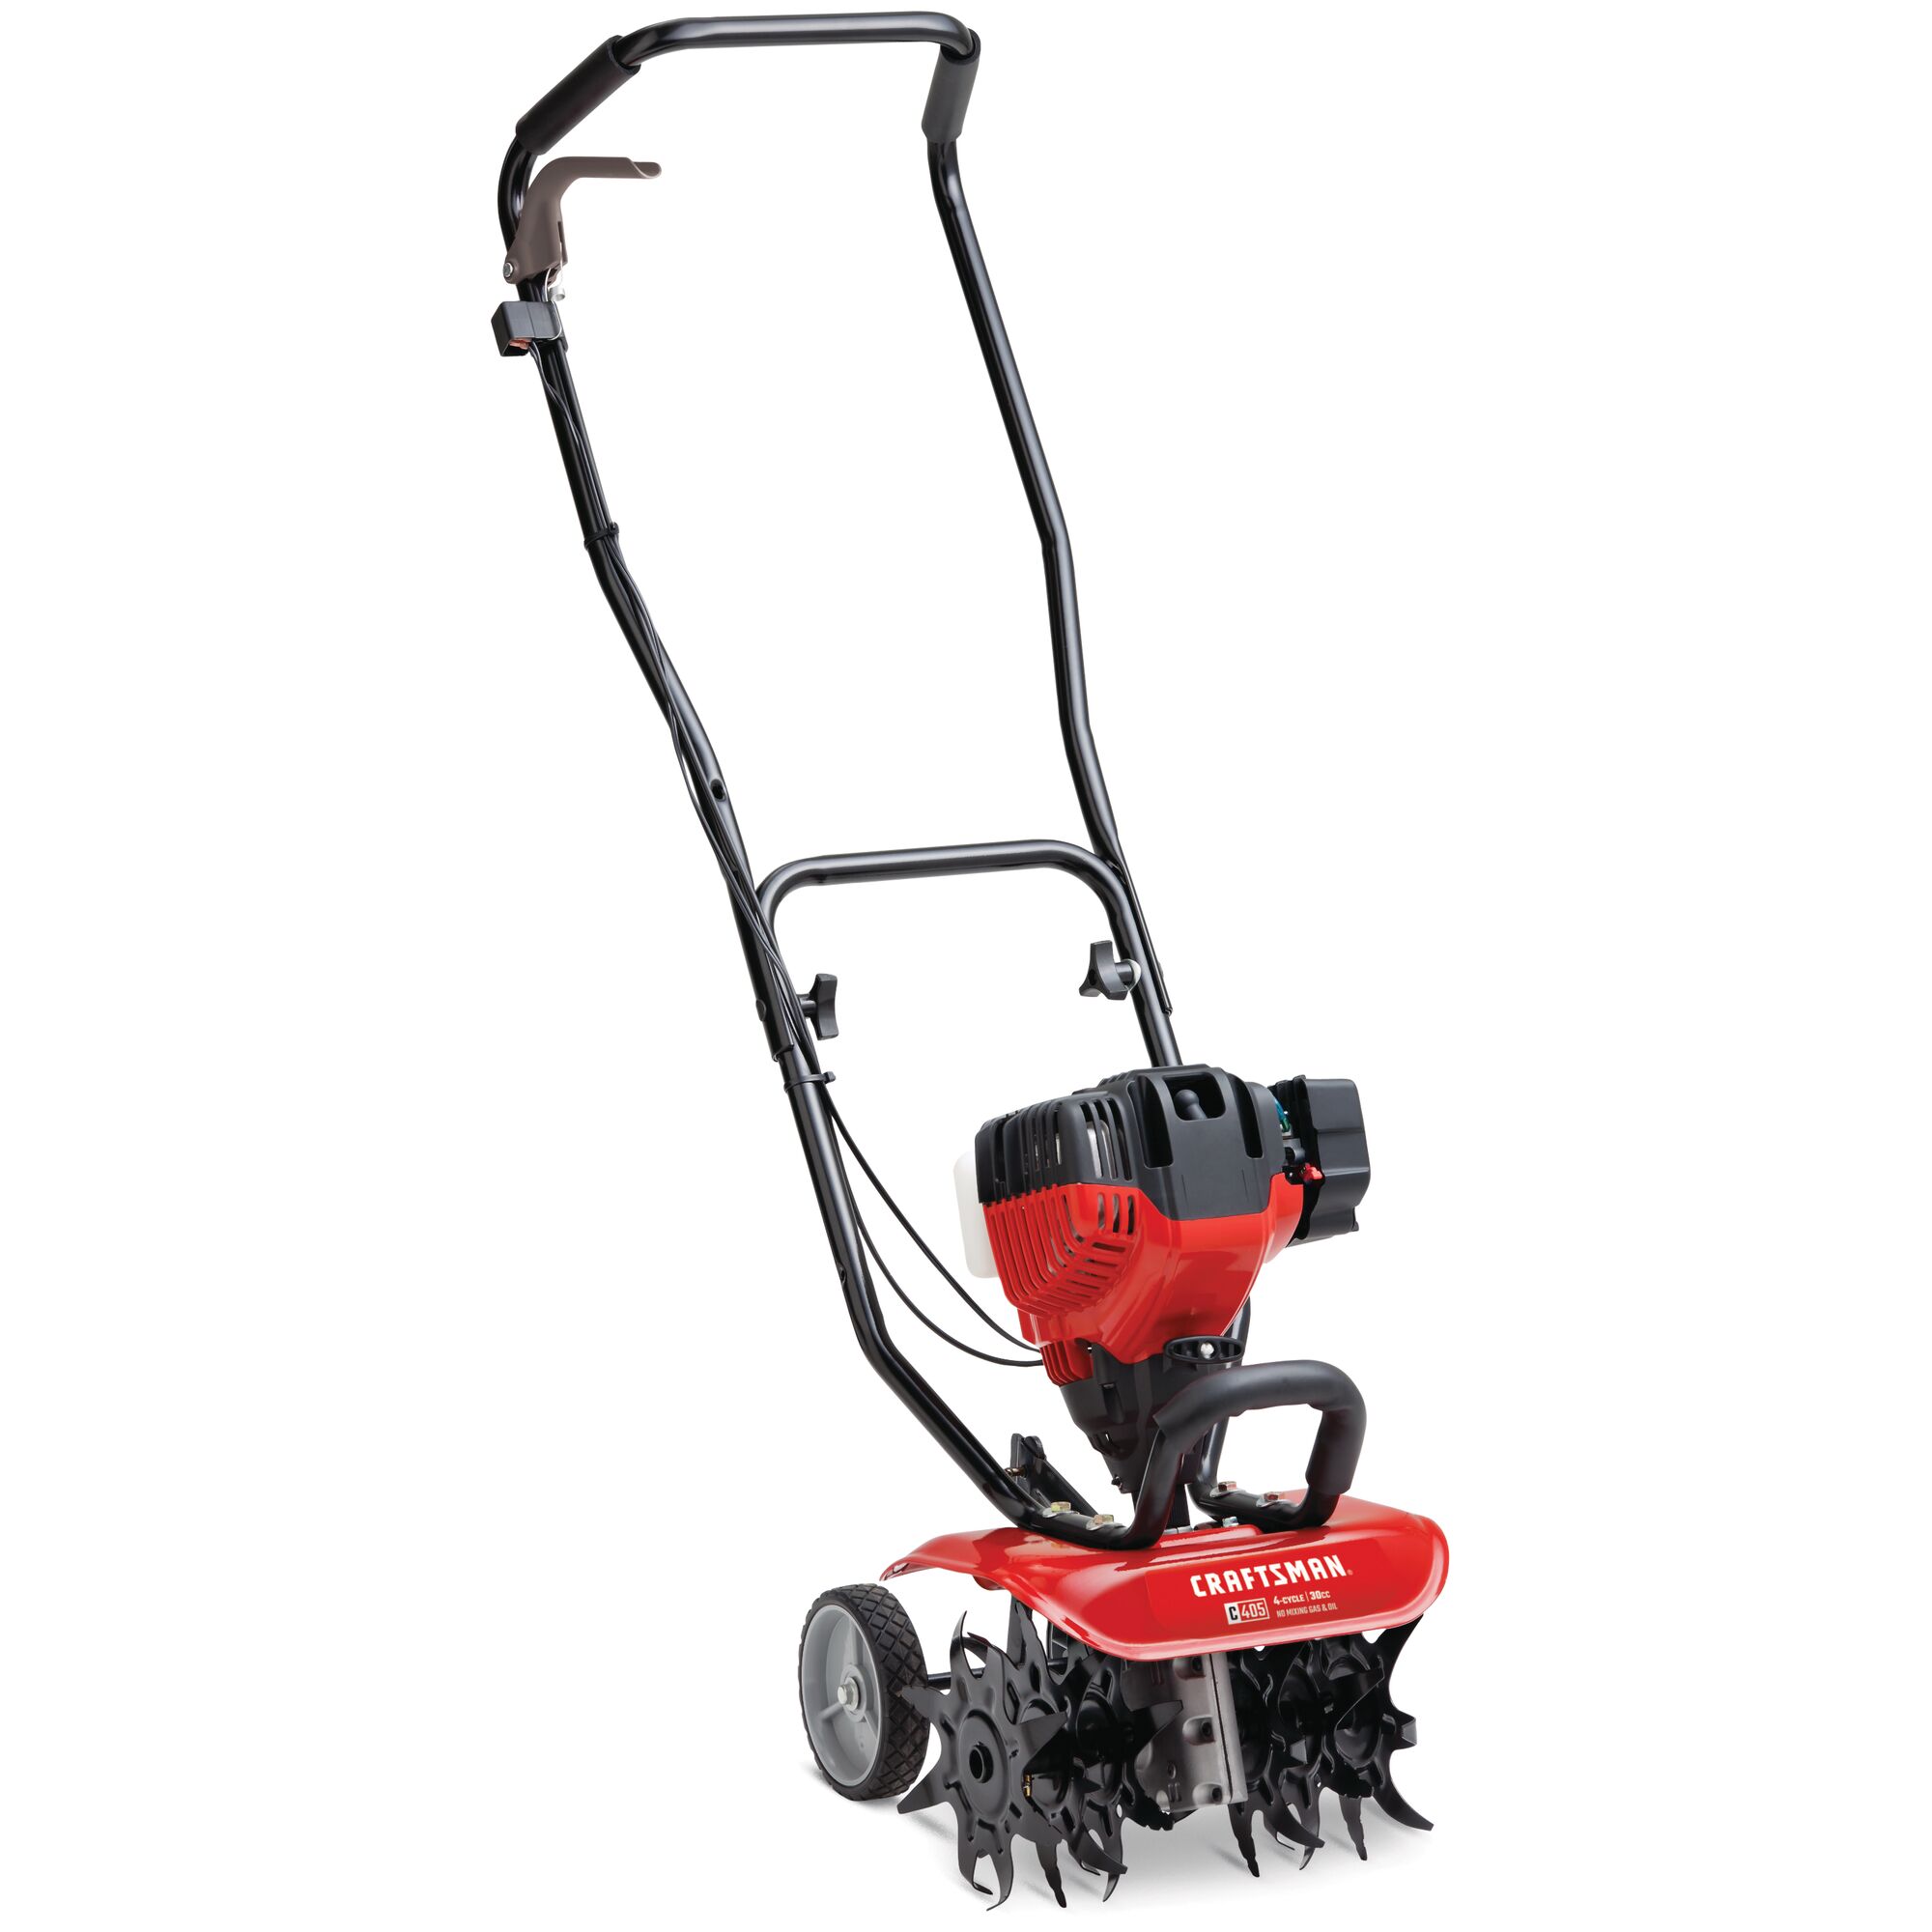 CRAFTSMAN gas cultivator on white background